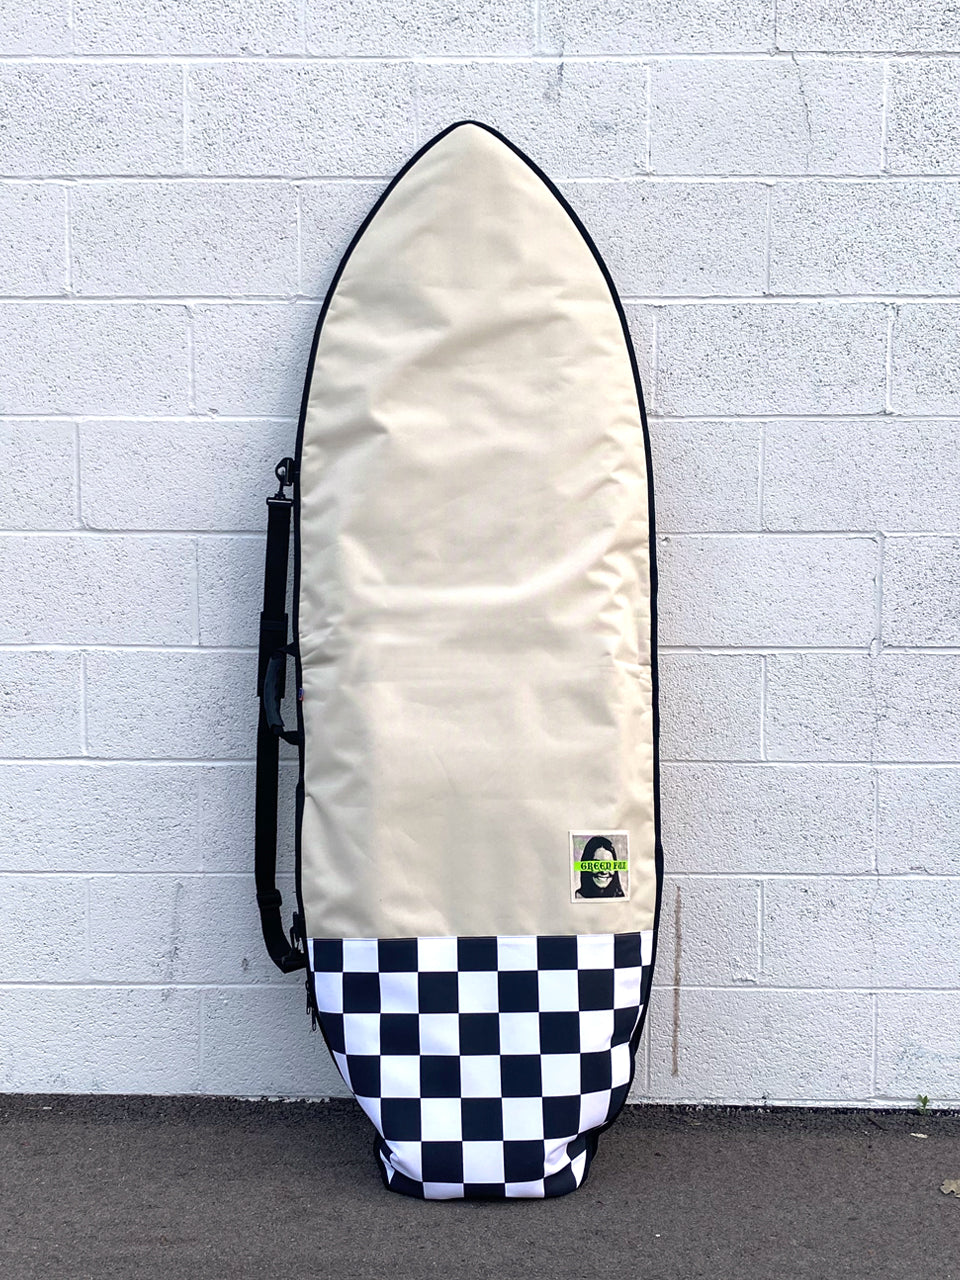 Amazon.com : Curve Surfboard Bag DAY Surfboard Cover - Supermodel  FISH/ROUND size 5'6 to 7'2 (5'6 fish) : Sports & Outdoors